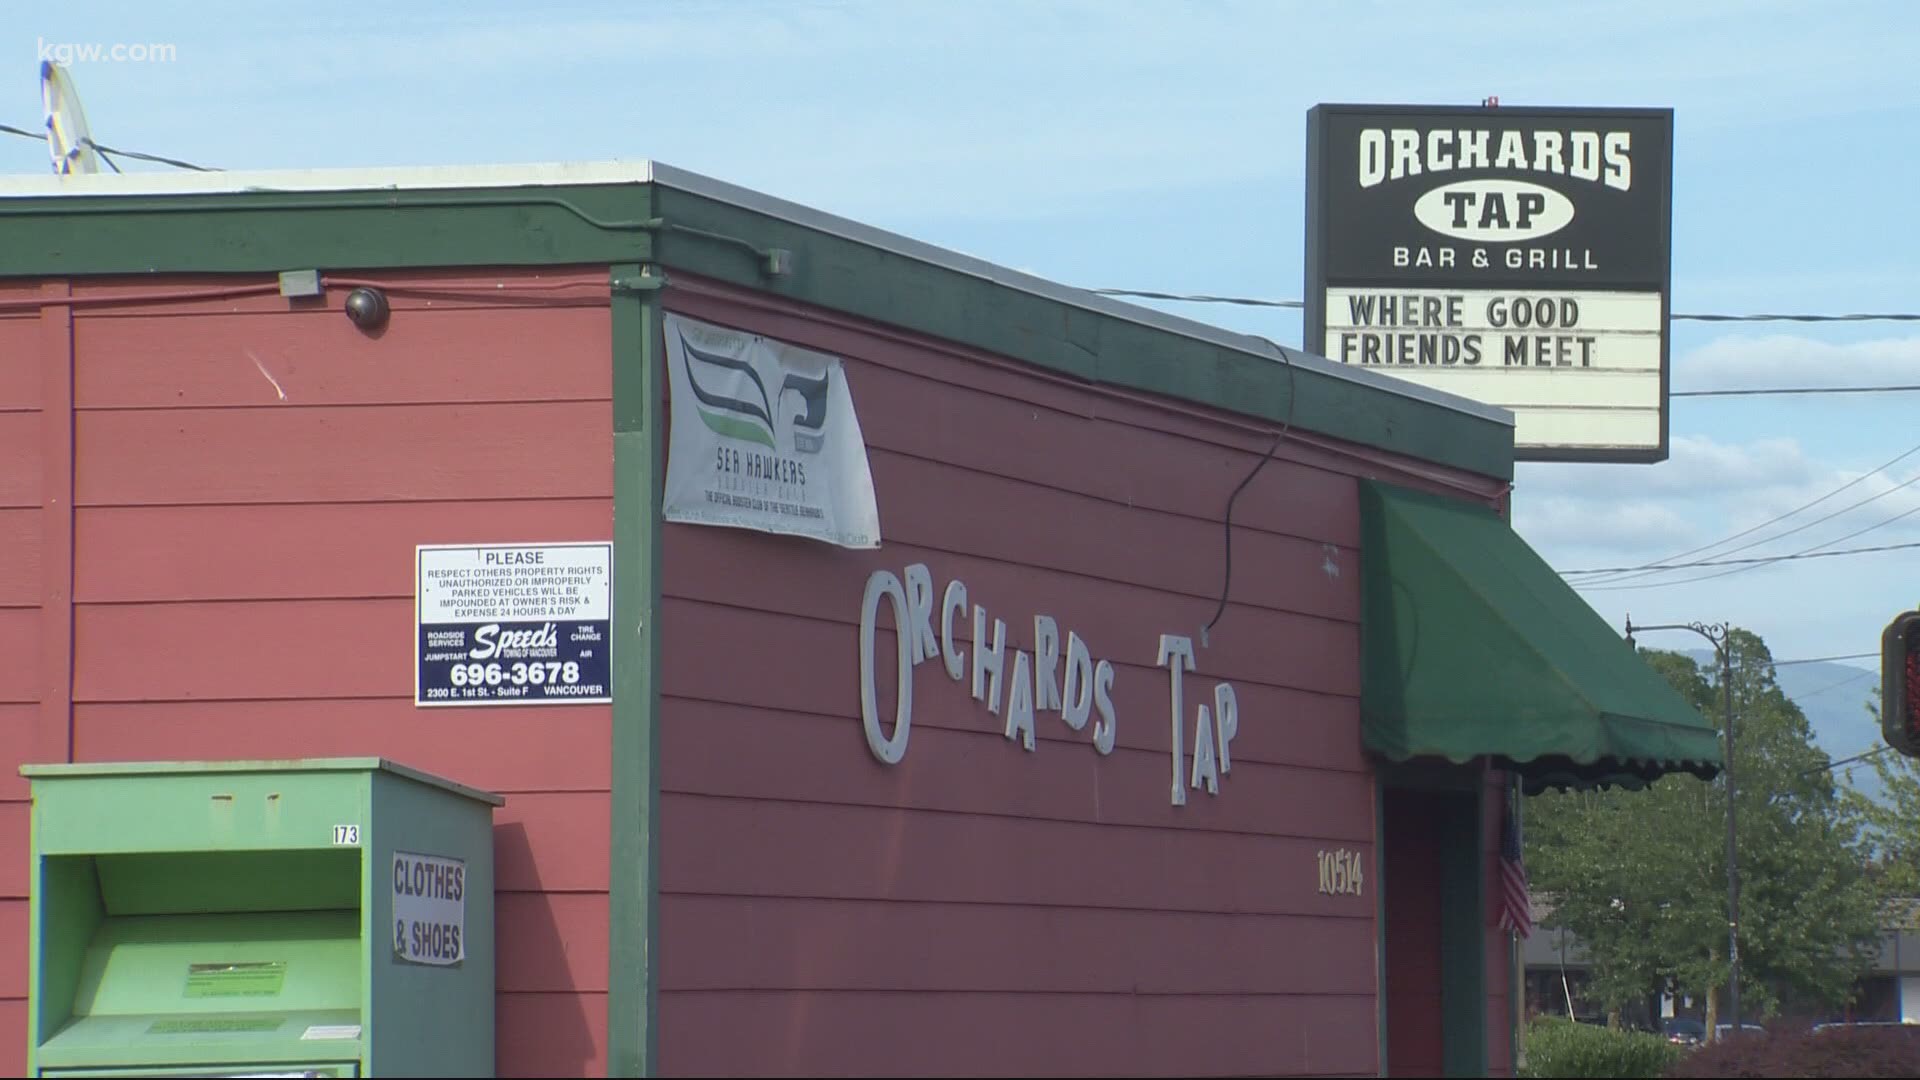 Clark County officials are warning customers of a COVID-19 outbreak Vancouver bar. Officials would like people who were at the bar between June 19-25 to be tested.